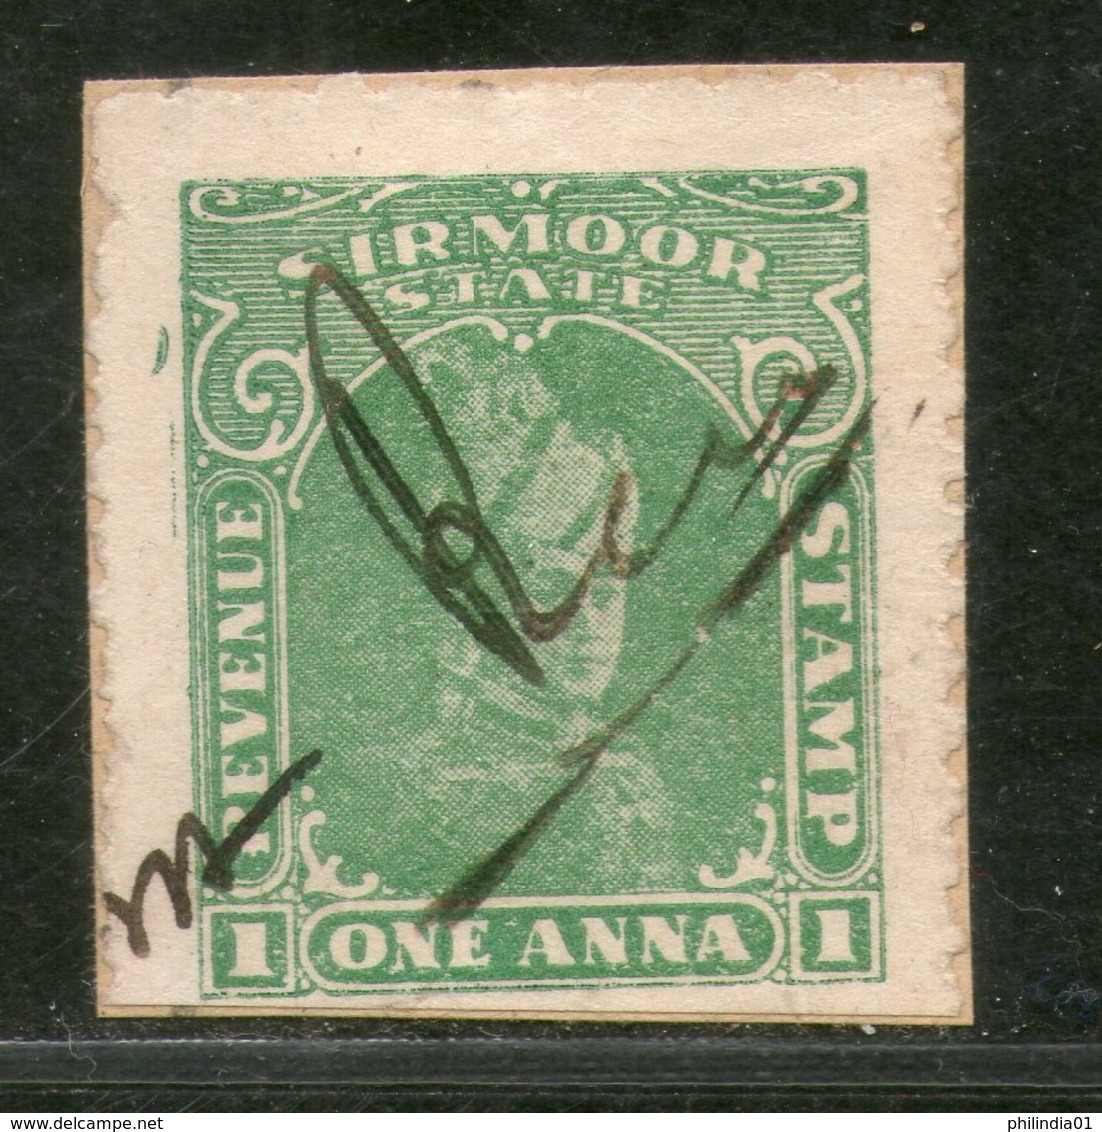 India Fiscal Sirmoor State 1 An King Type15 KM151 Court Fee Revenue Stamp # 278C - Sirmoor